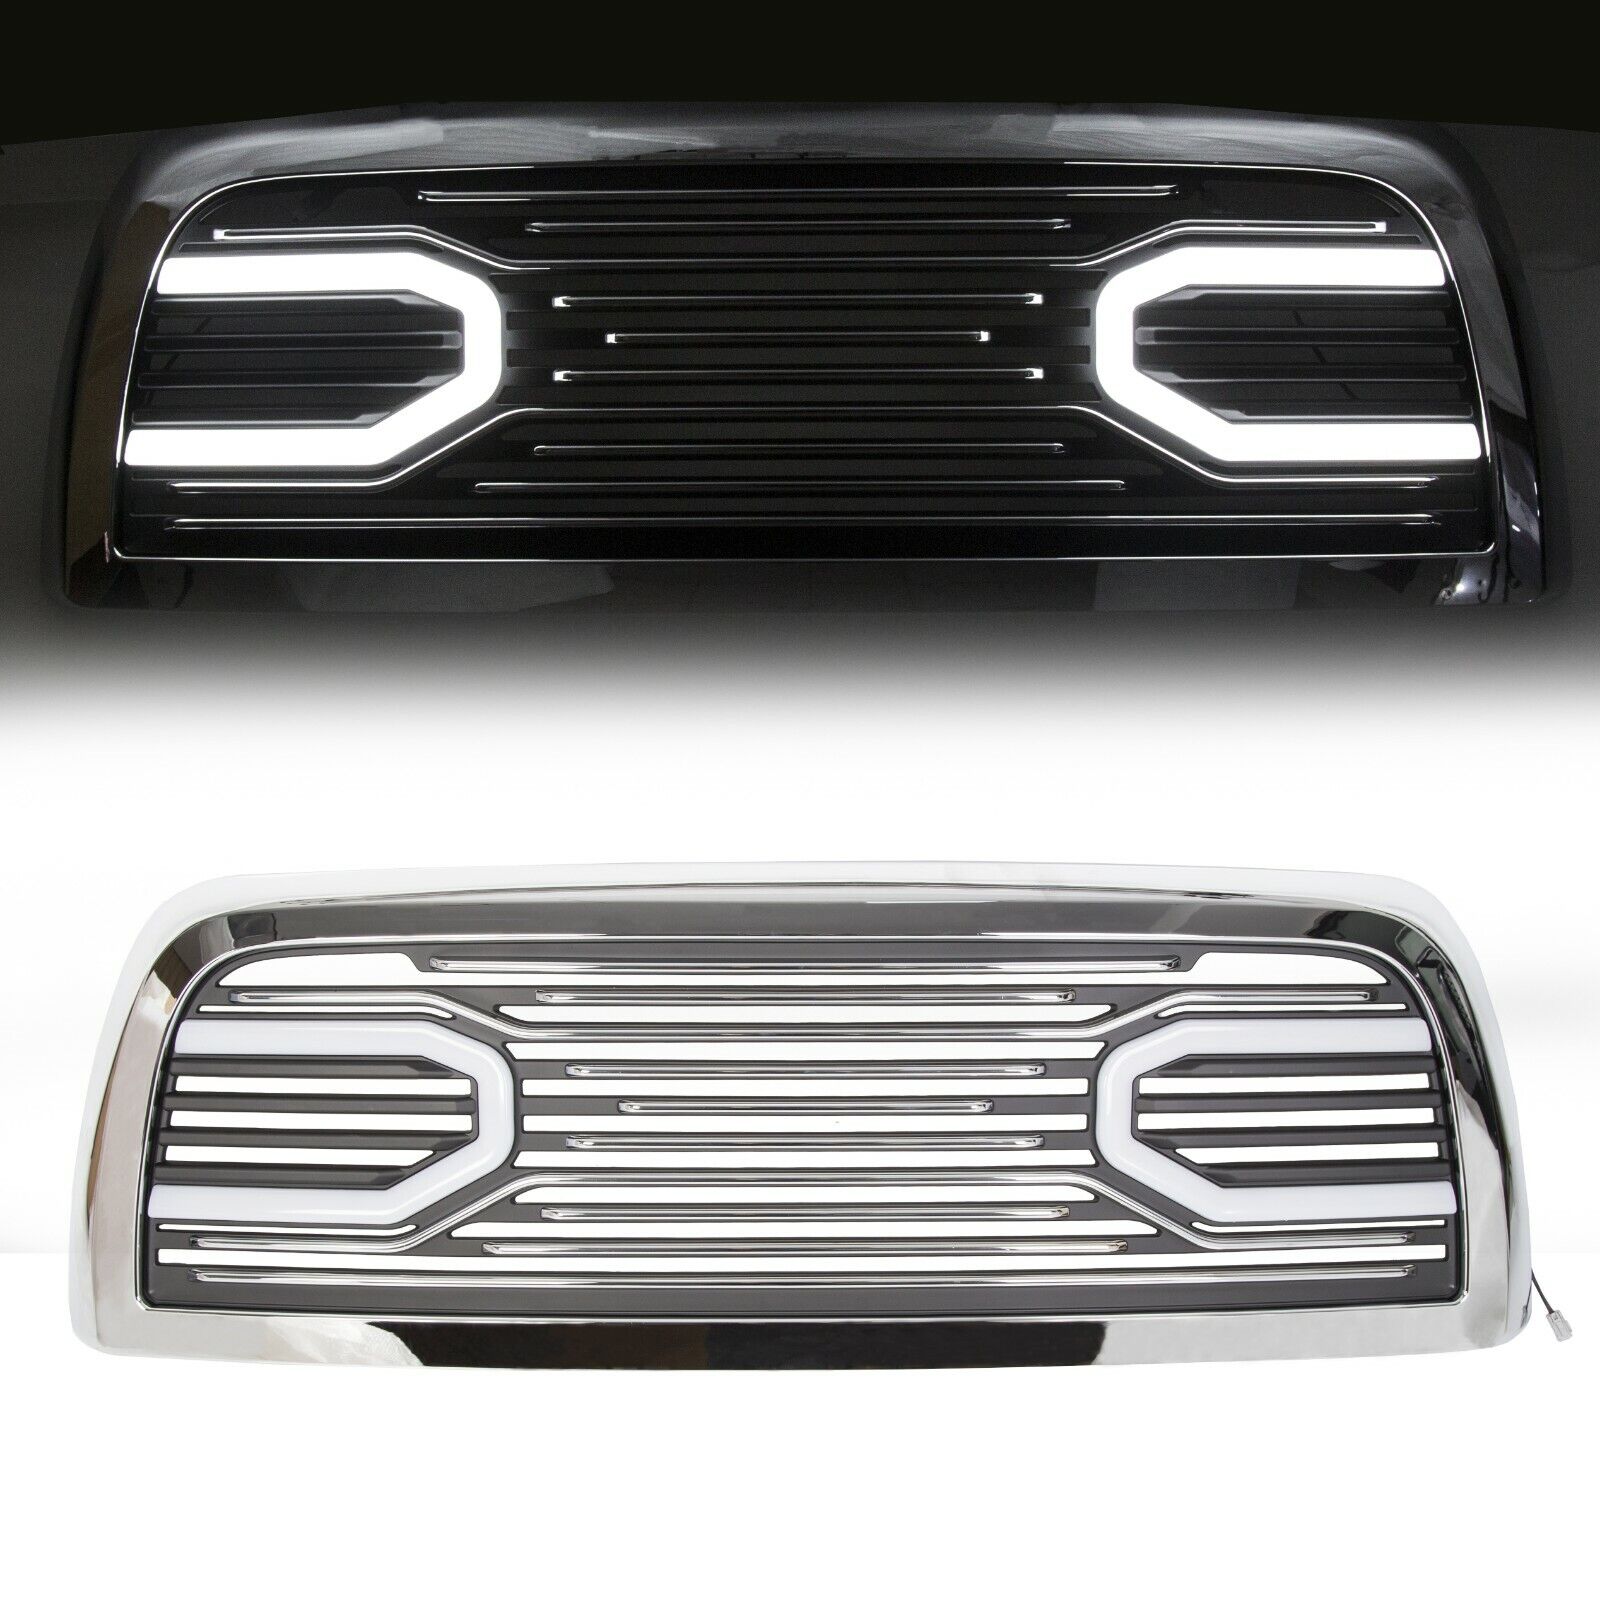 For 10-18 Dodge Ram 2500 3500 Big Horn Chrome Grille &Replacement Shell & Lights